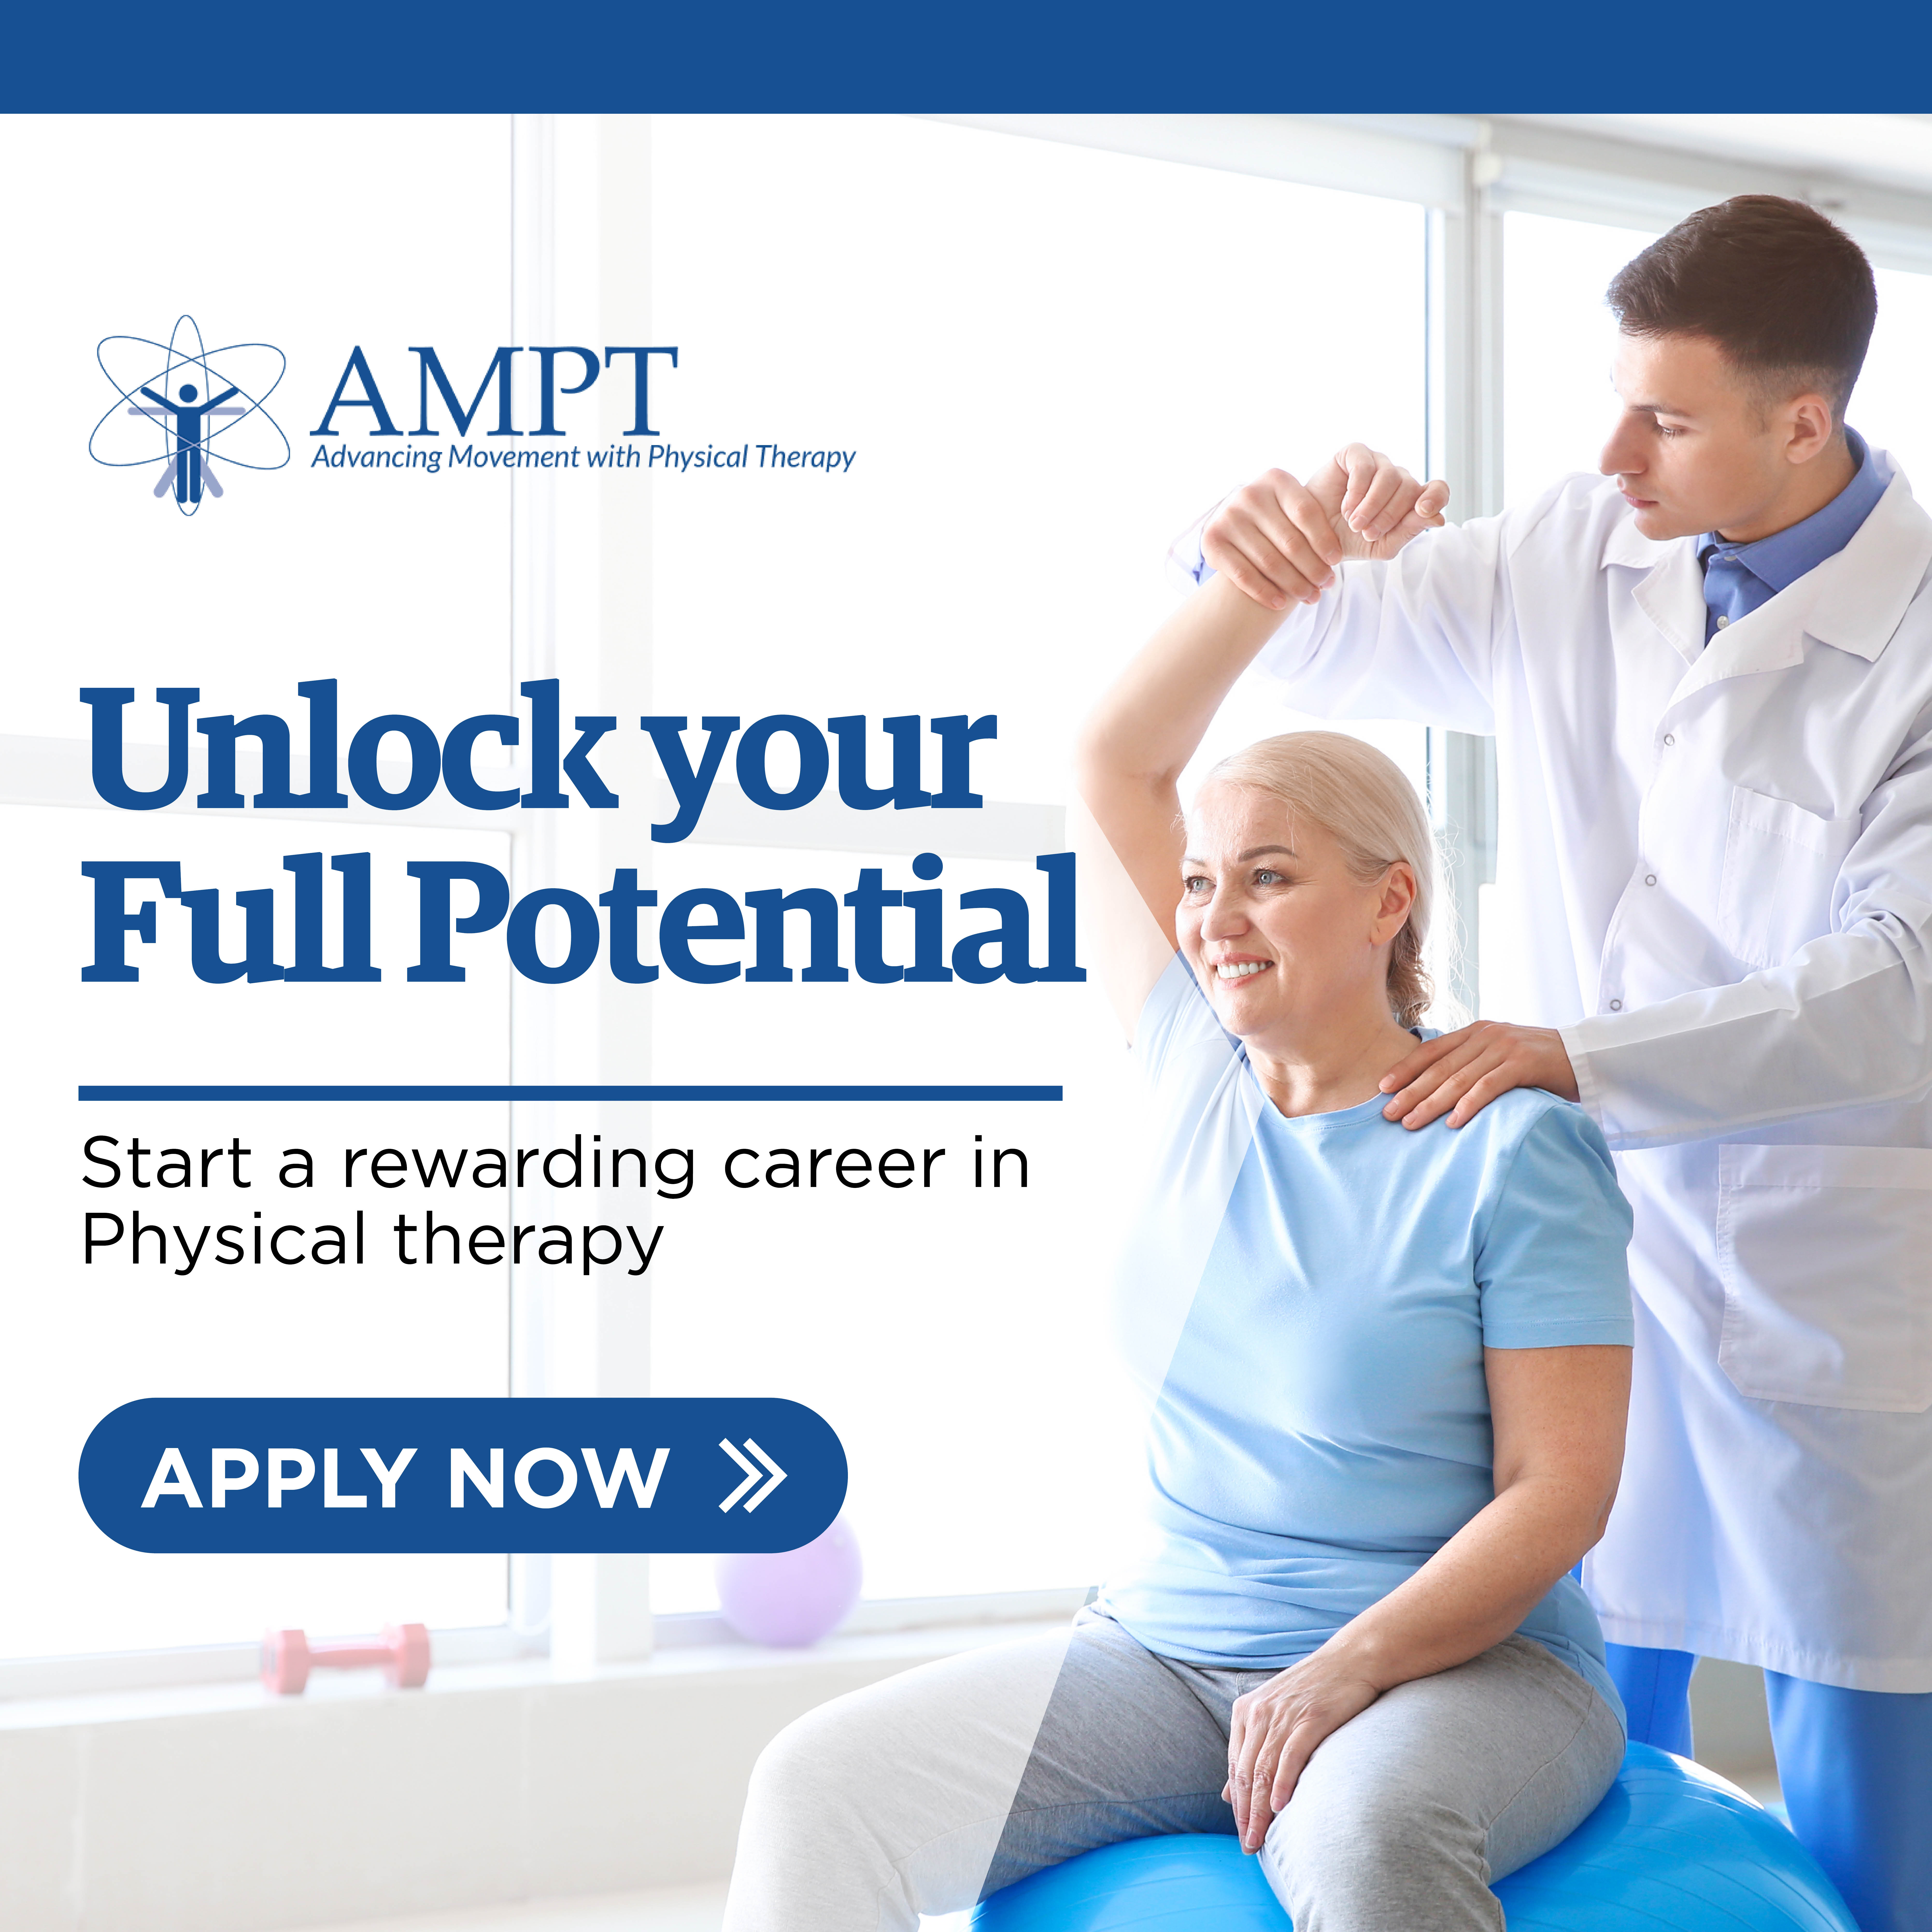 Click here to apply for a career with Advancing Movement with Physical Therapy (AMPT)